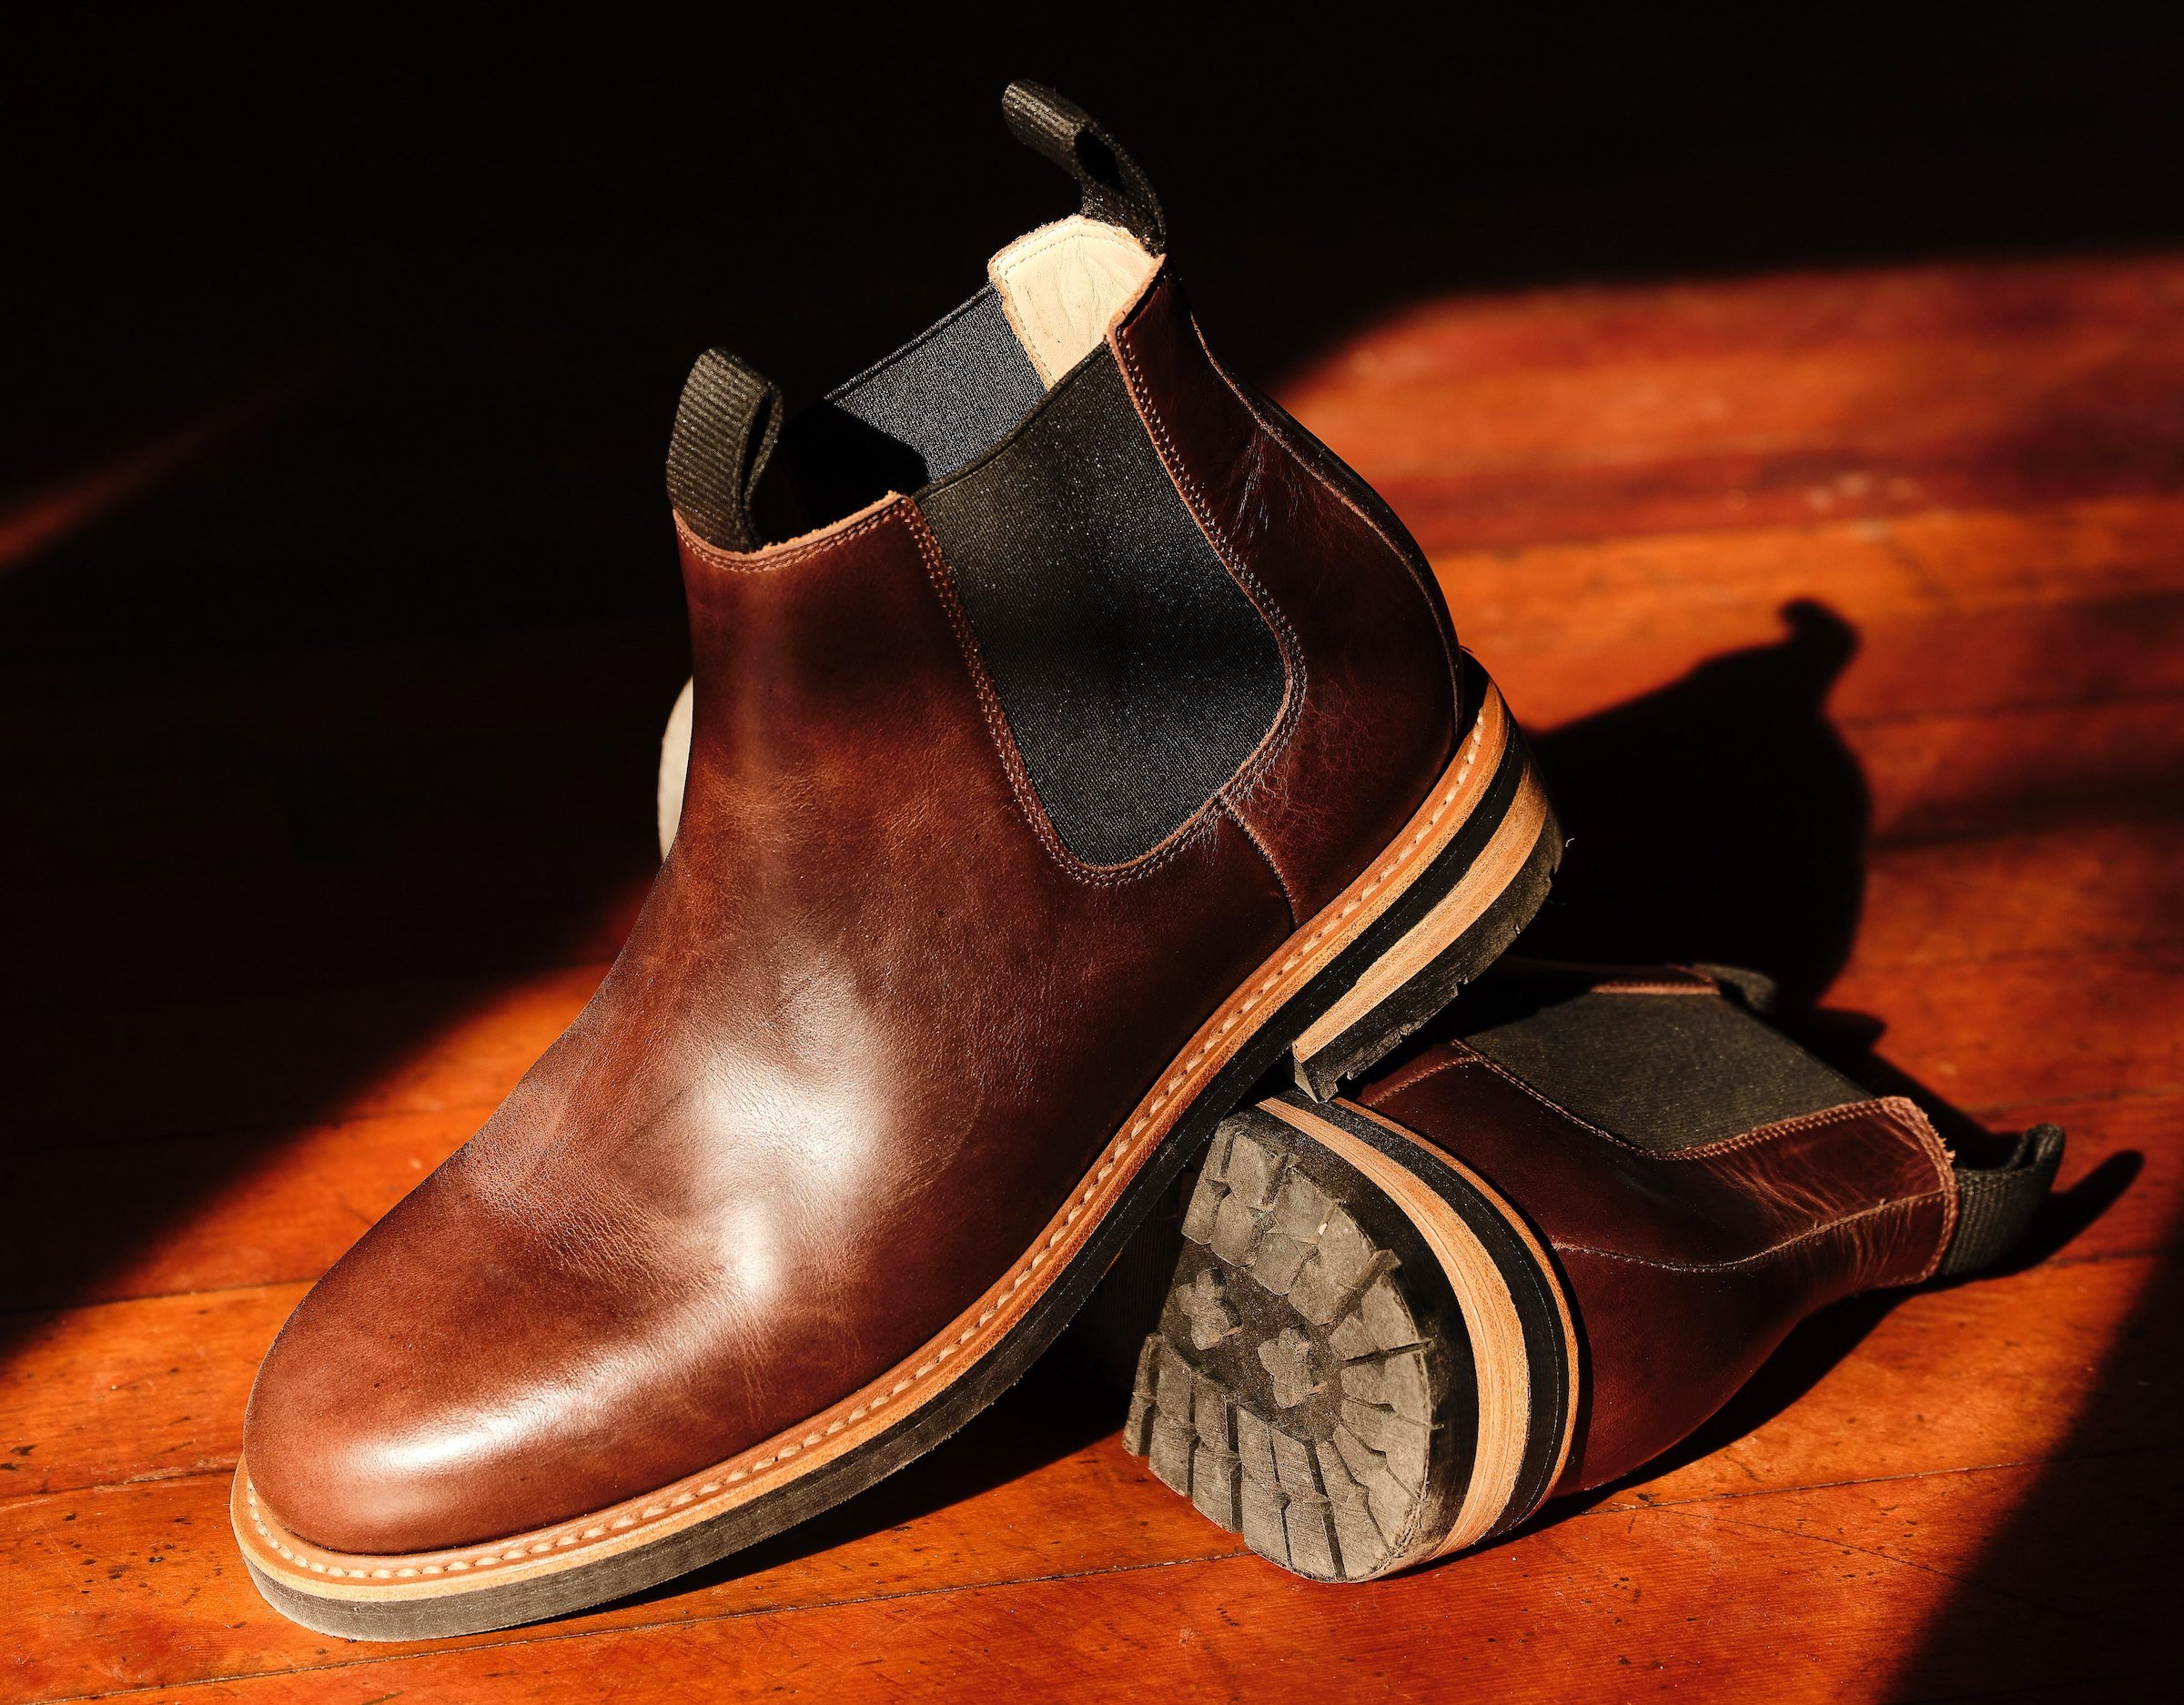 The Rhodes Cooper Boot